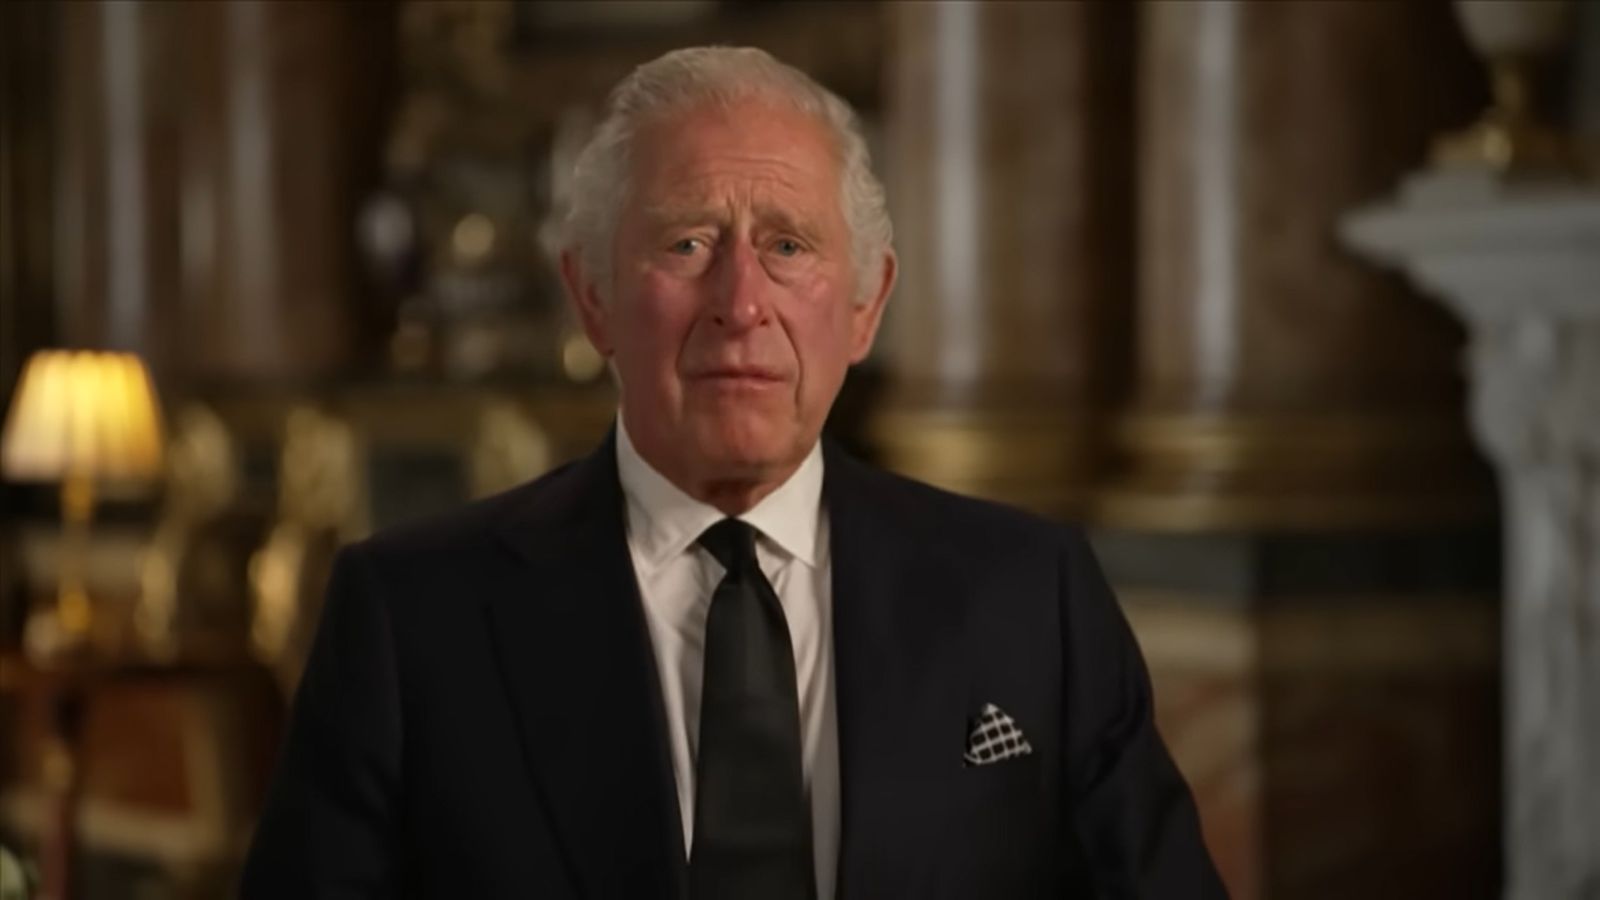 king-charles-decides-to-forgive-prince-harry-meghan-markle-following-harry-meghan-monarch-will-reportedly-mention-the-sussexes-in-his-christmas-speech